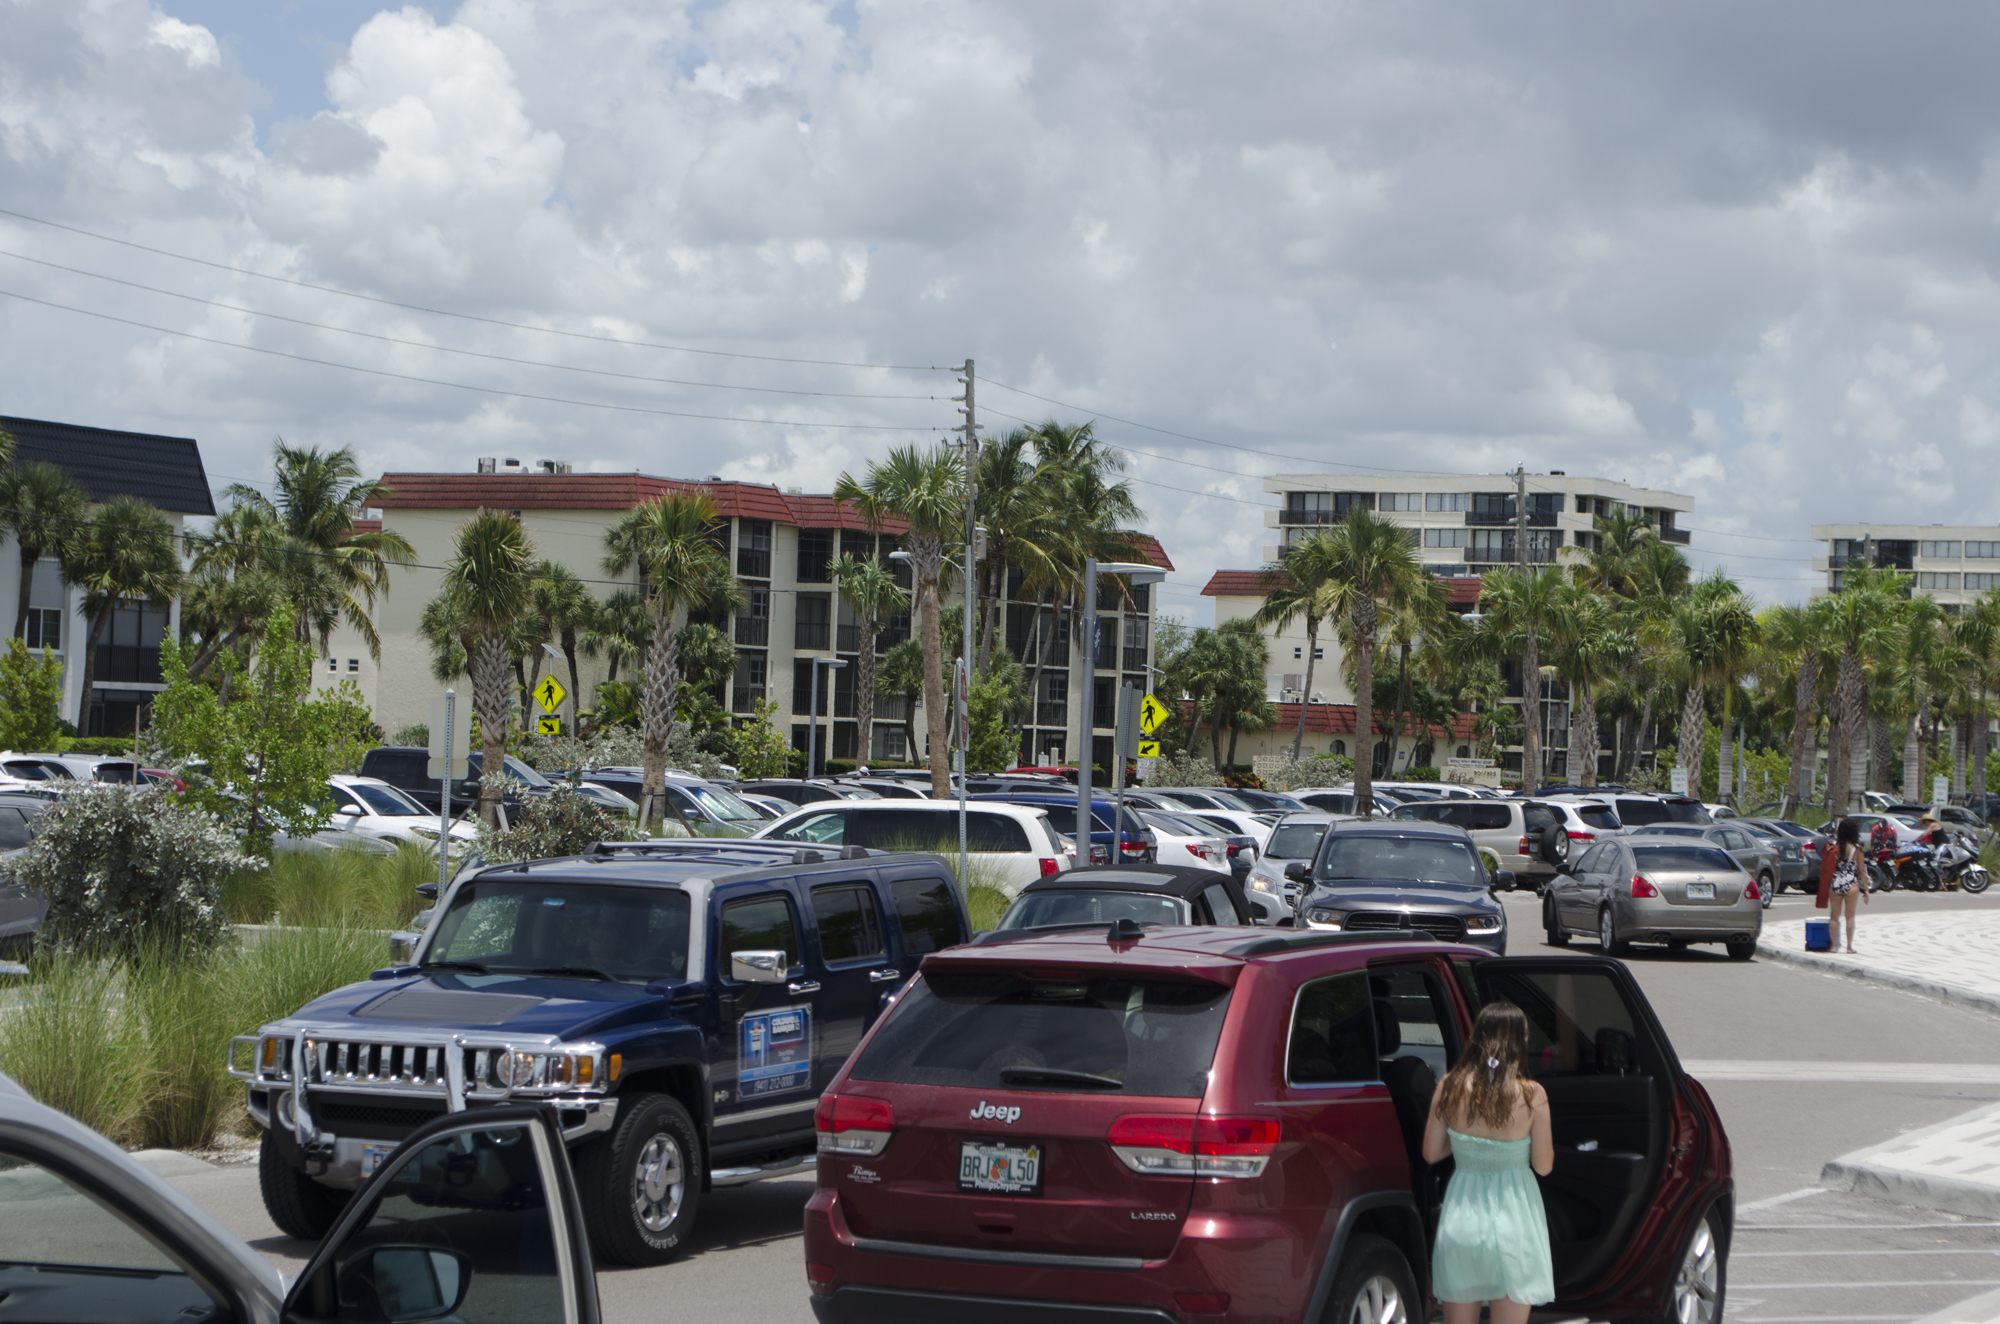 Parking on Siesta Key remained a point of contention.